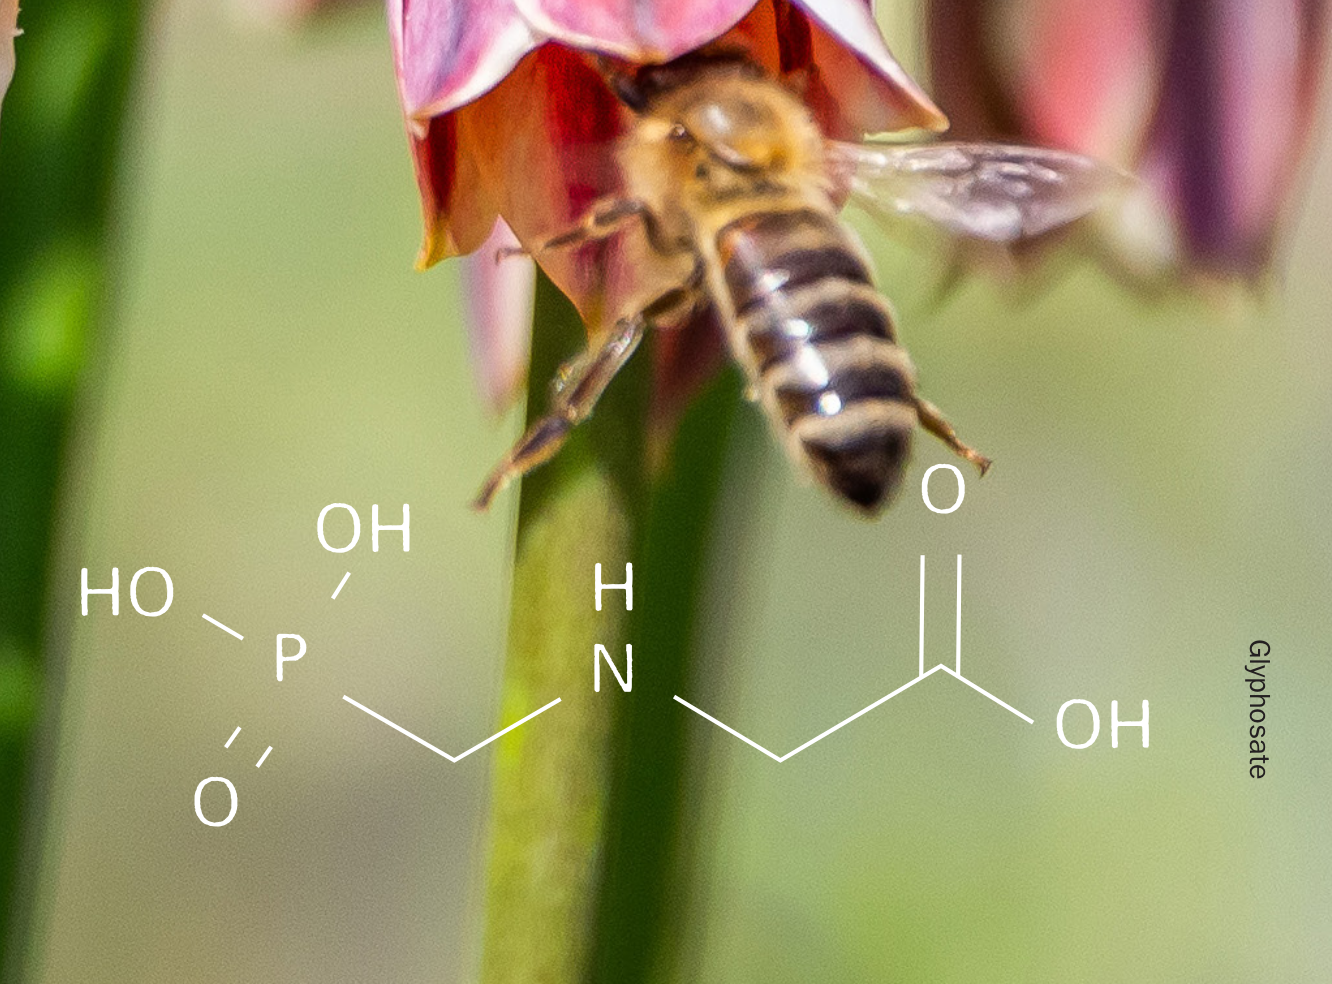 glyphosate_based_herbicides_and_their_impact_on_bees_p3_crop.png